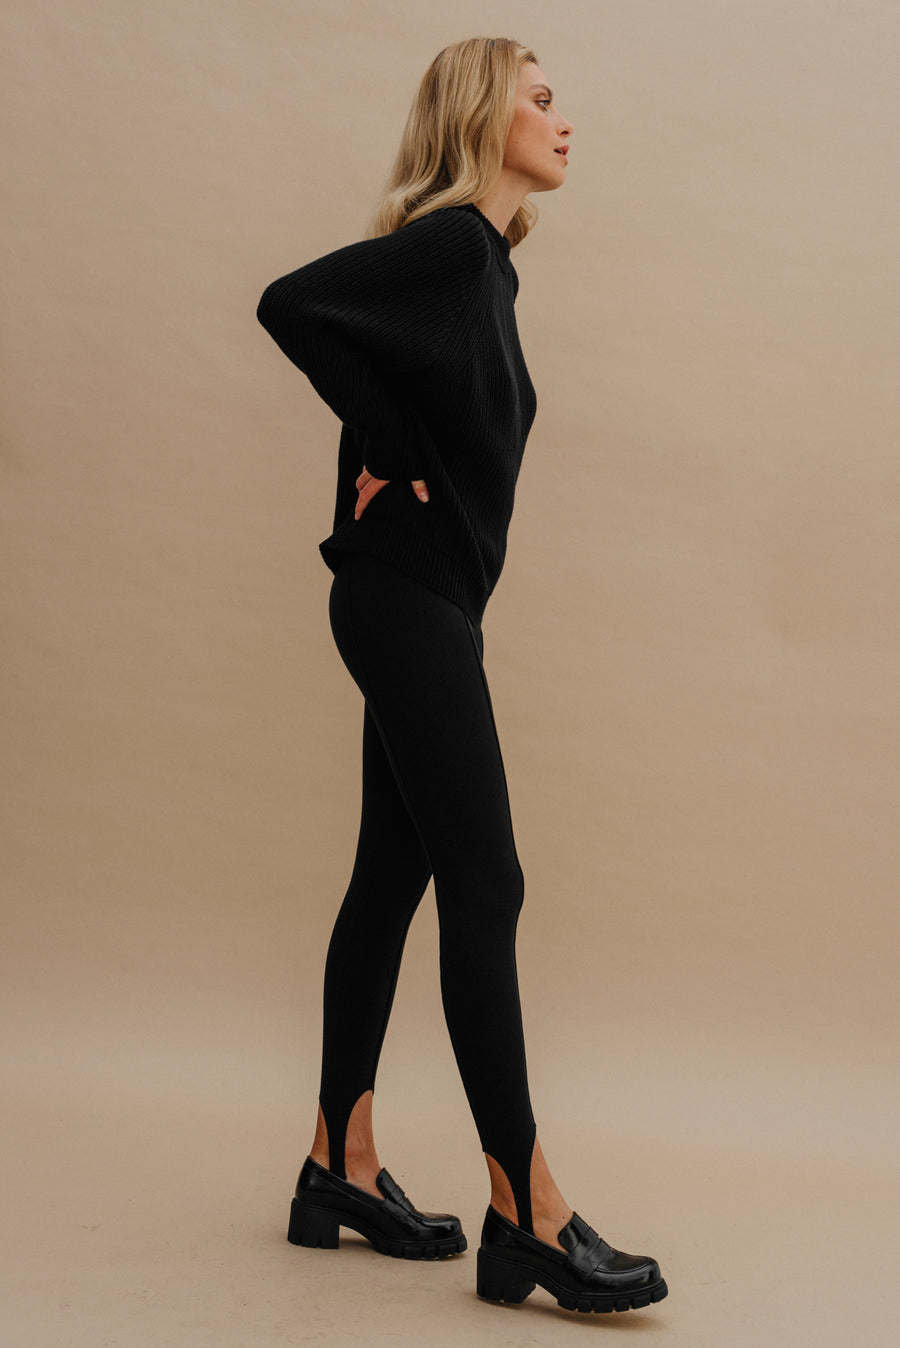 Leggings in organic cotton / 04 / 11 / onyx black *sweater-in-organic-cotton-16-07-onyx-black* ?The model is 178cm tall and wears size S? |